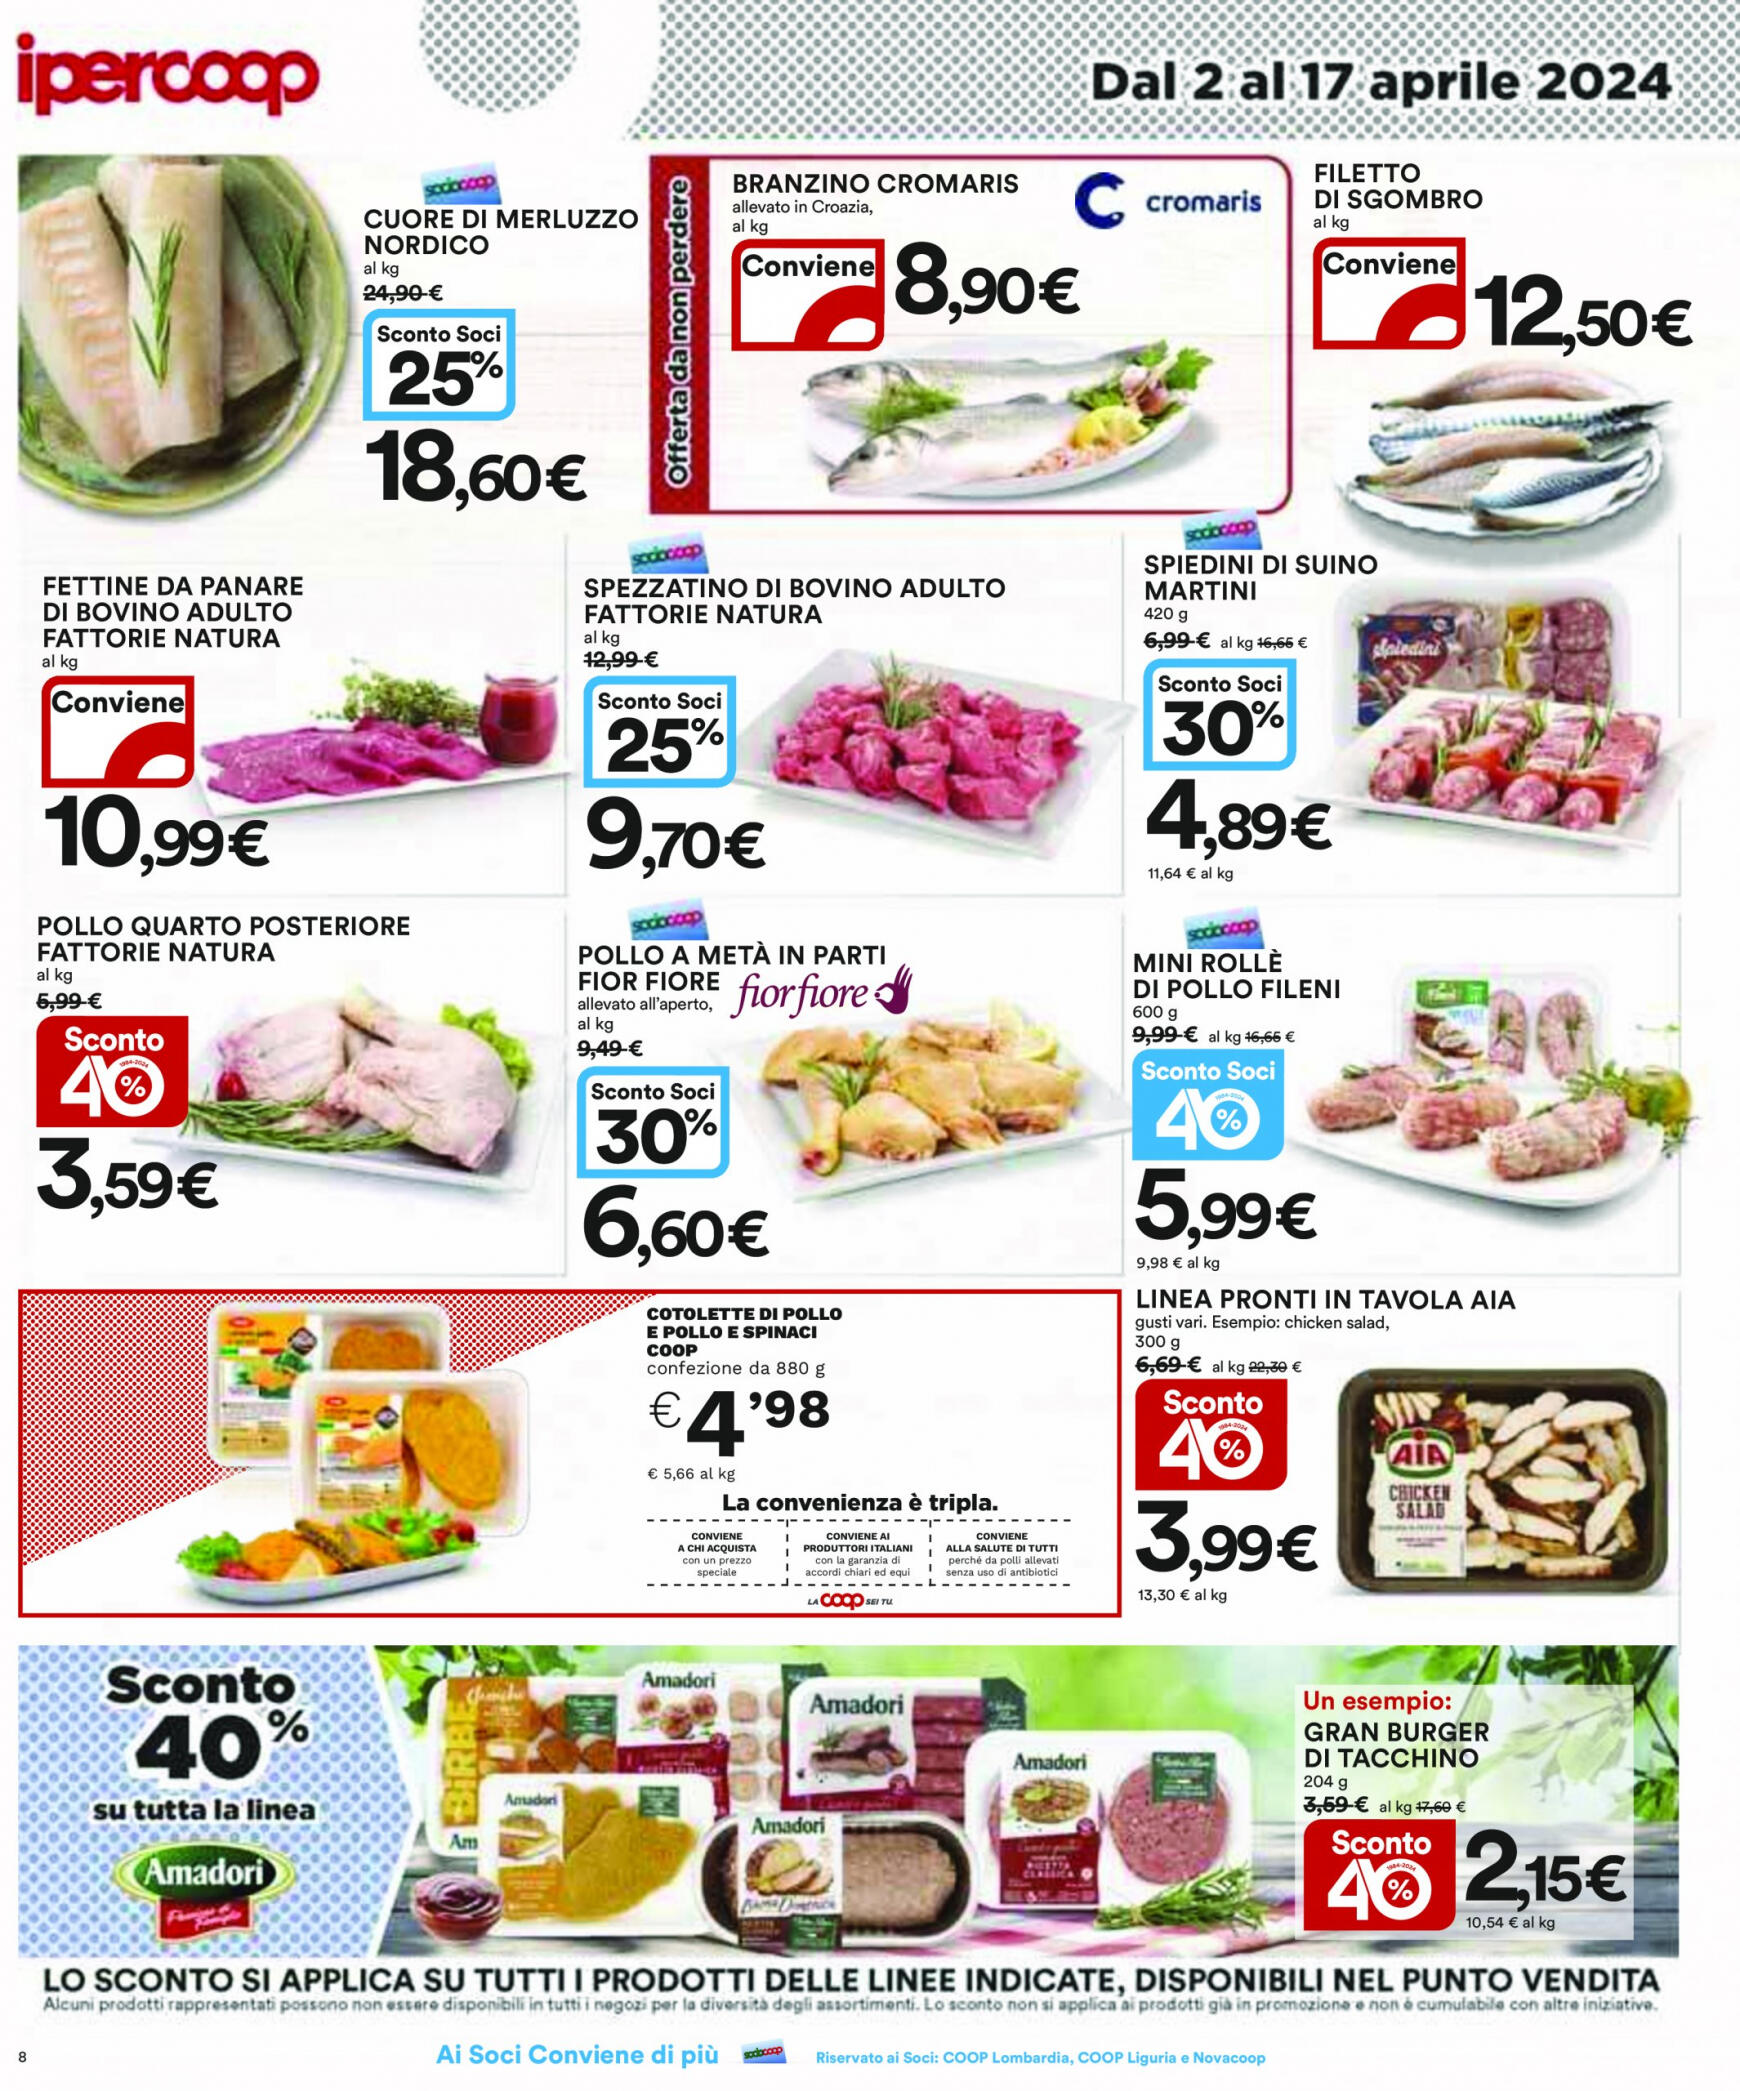 coop - Nuovo volantino Coop 02.04. - 17.04. - page: 8